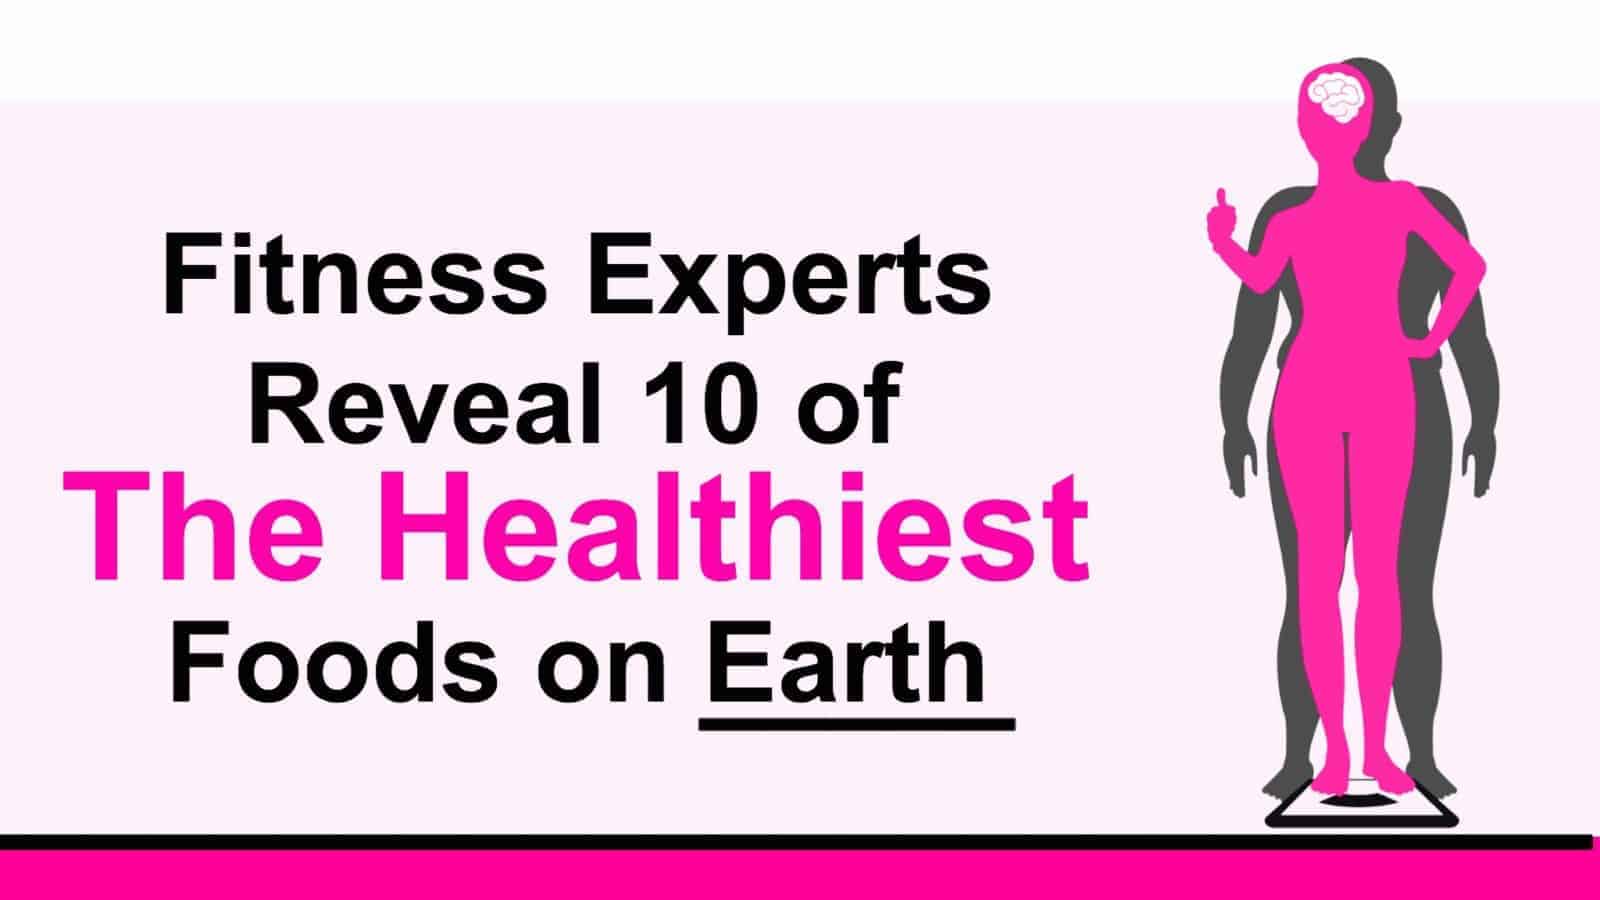 Fitness Experts Reveal 10 of The Healthiest Foods on Earth